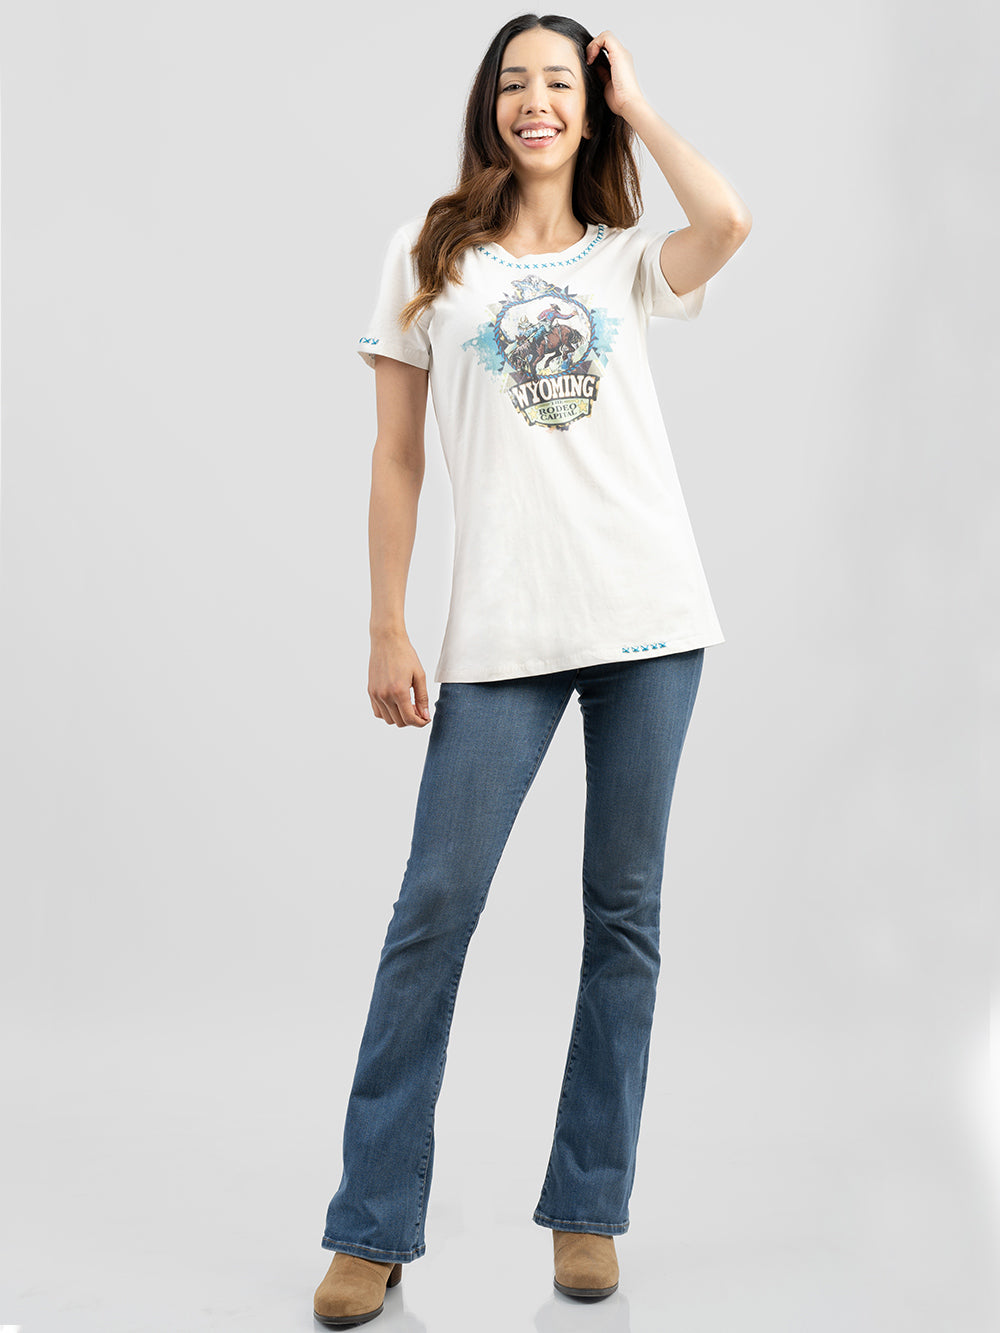 Delila Women Washed Wyoming Rodeo Capttal Tee - Montana West World